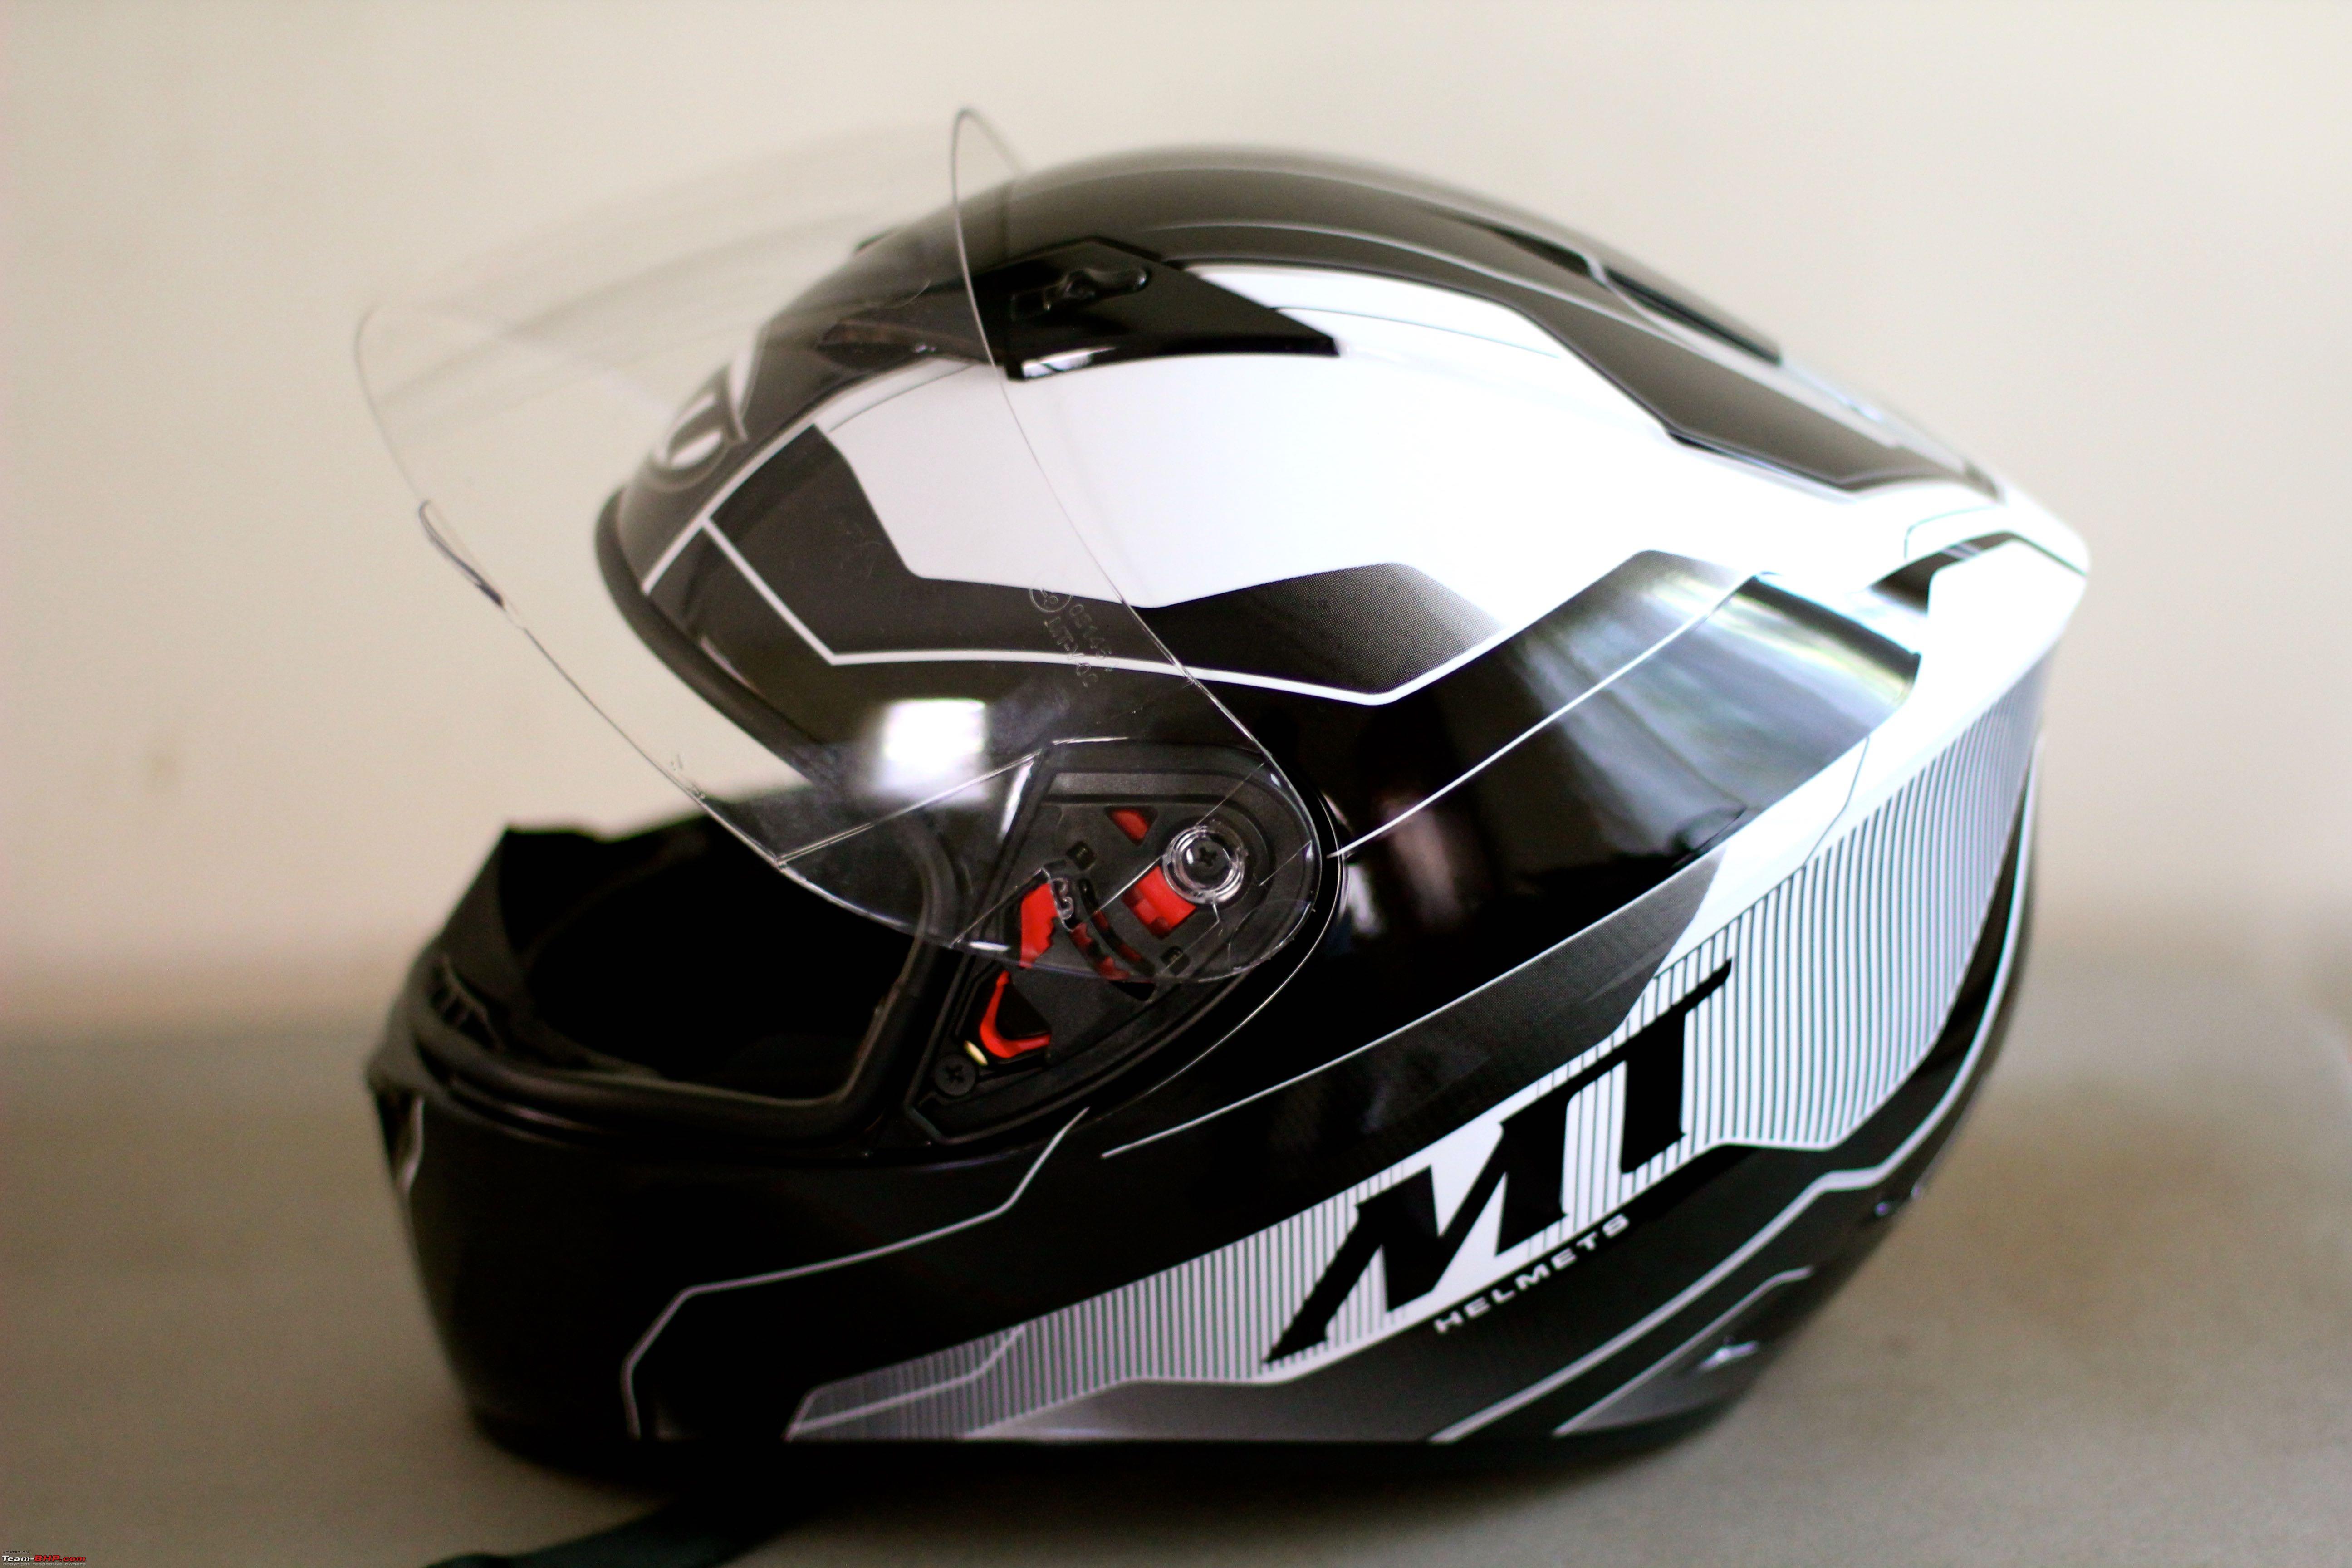 Which Helmet? Tips on buying a good helmet - Page 109 - Team-BHP